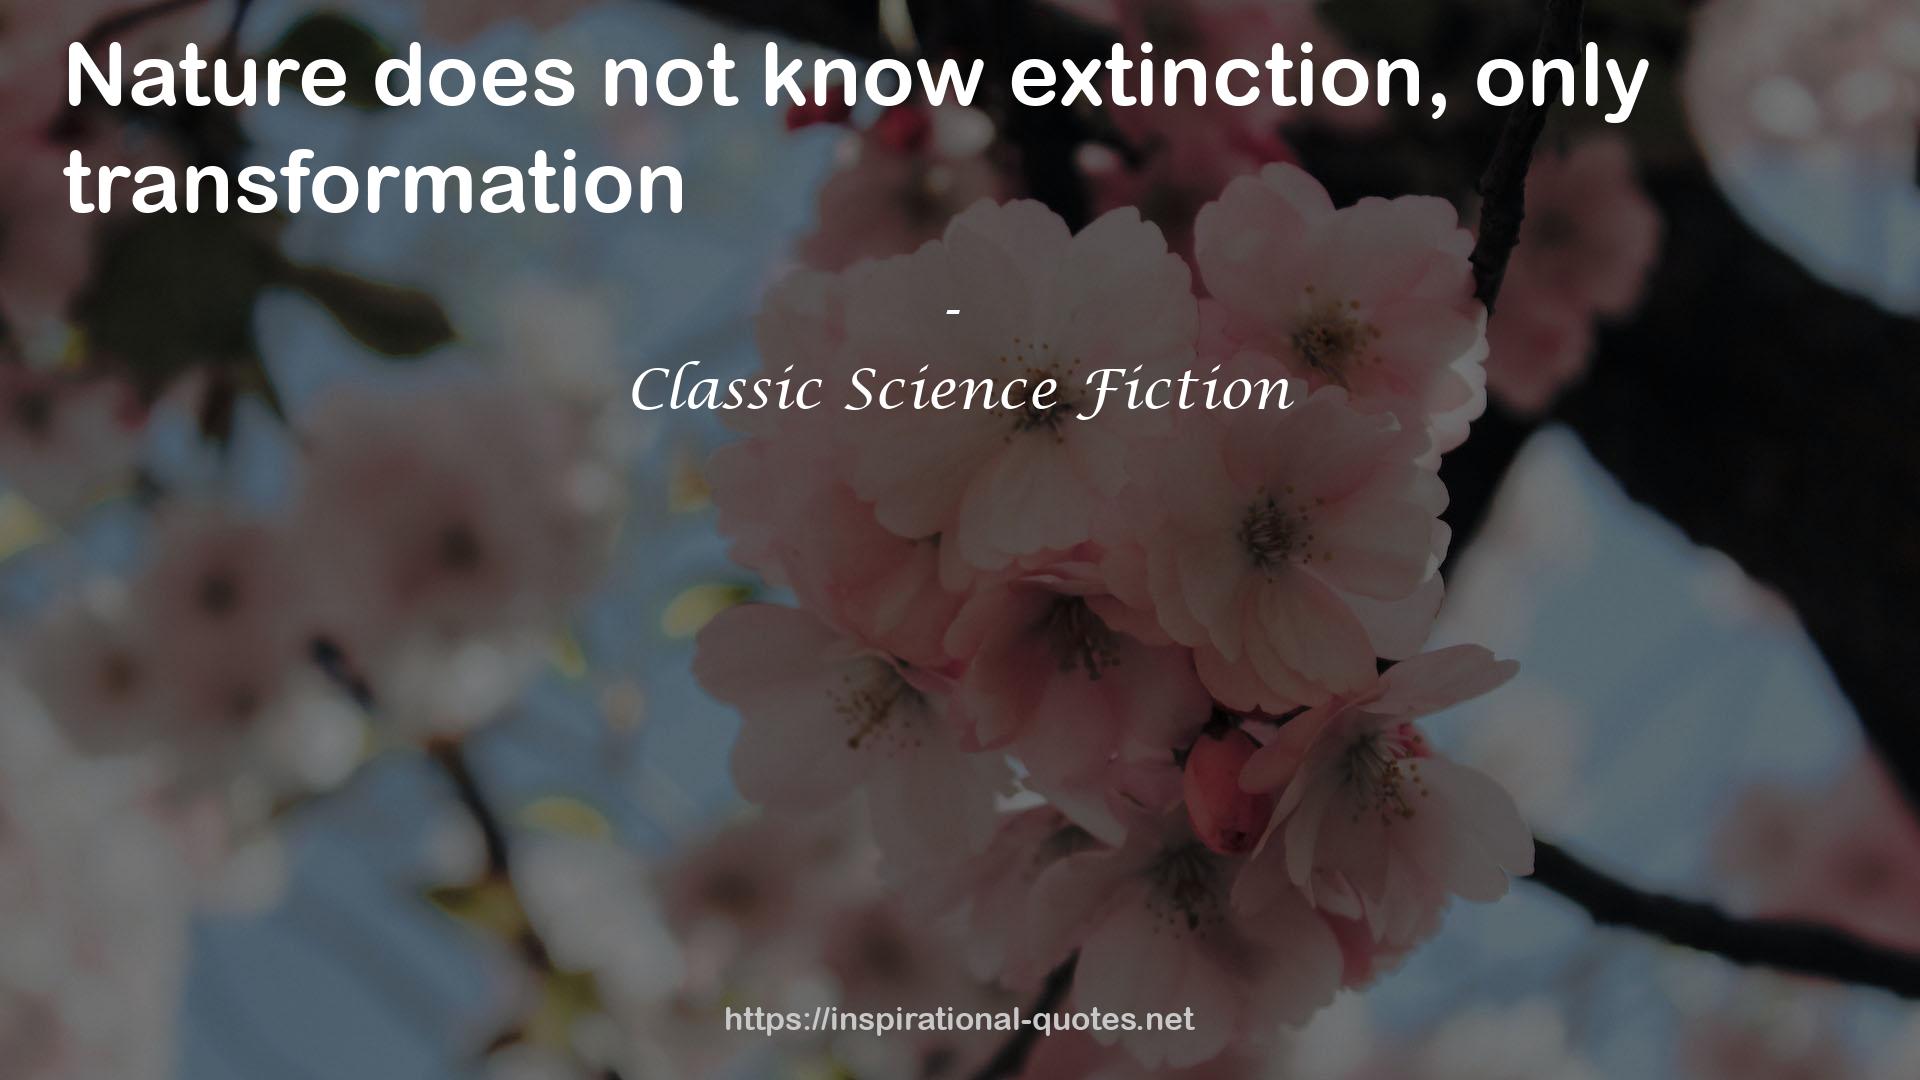 Classic Science Fiction QUOTES